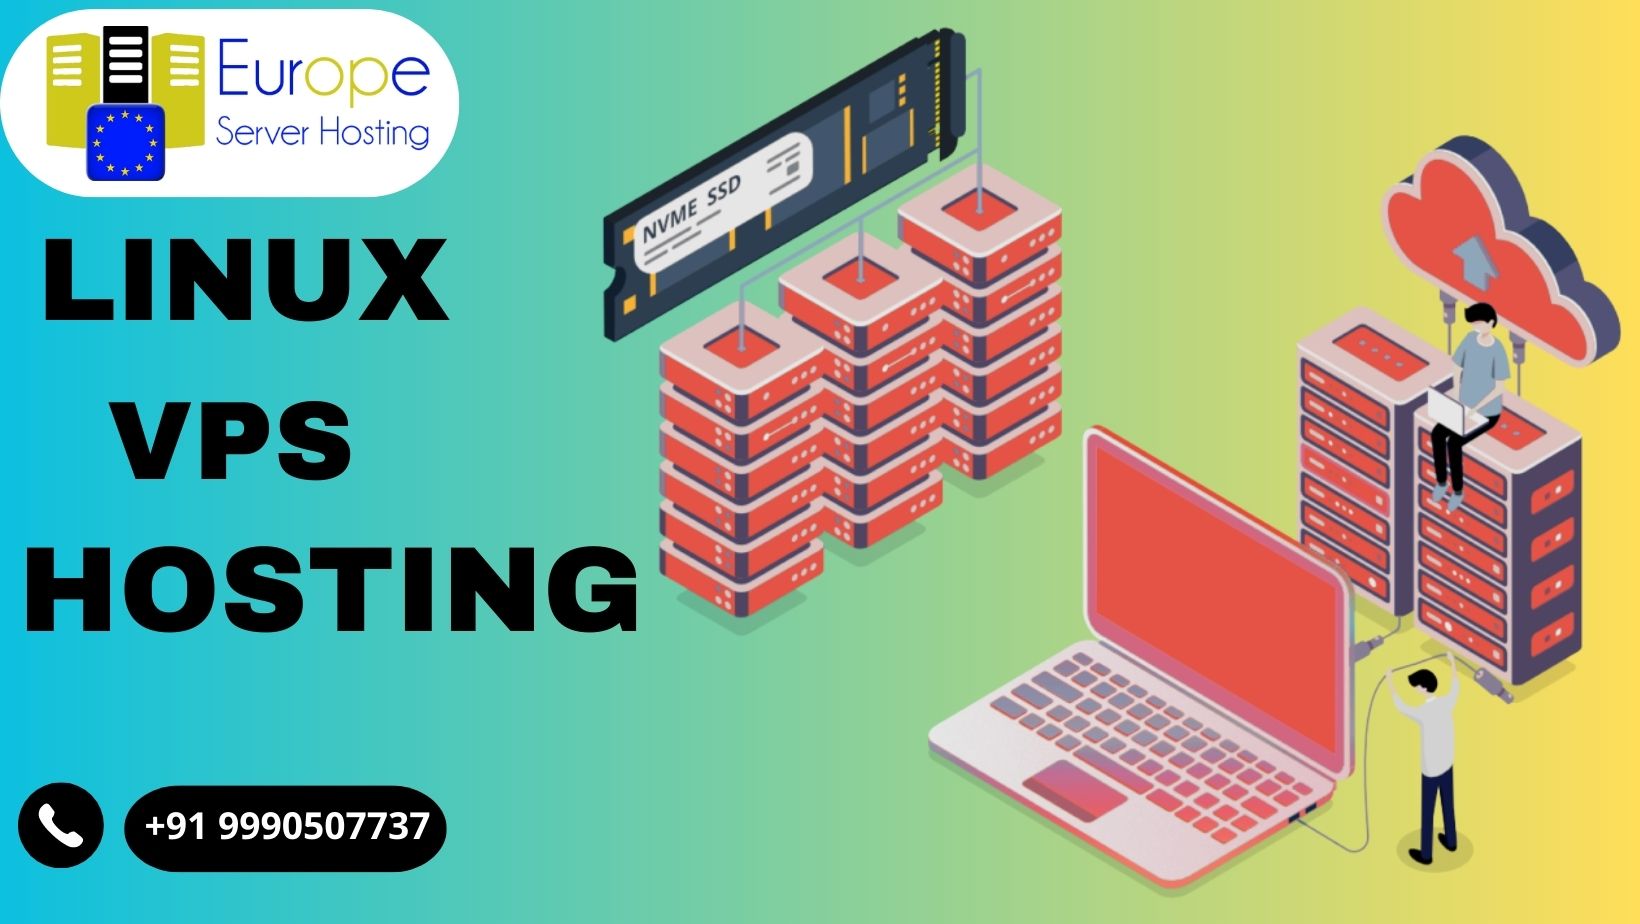 The enhanced performance, reliability, and security features offered by Linux VPS Hosting justify the slightly higher cost.